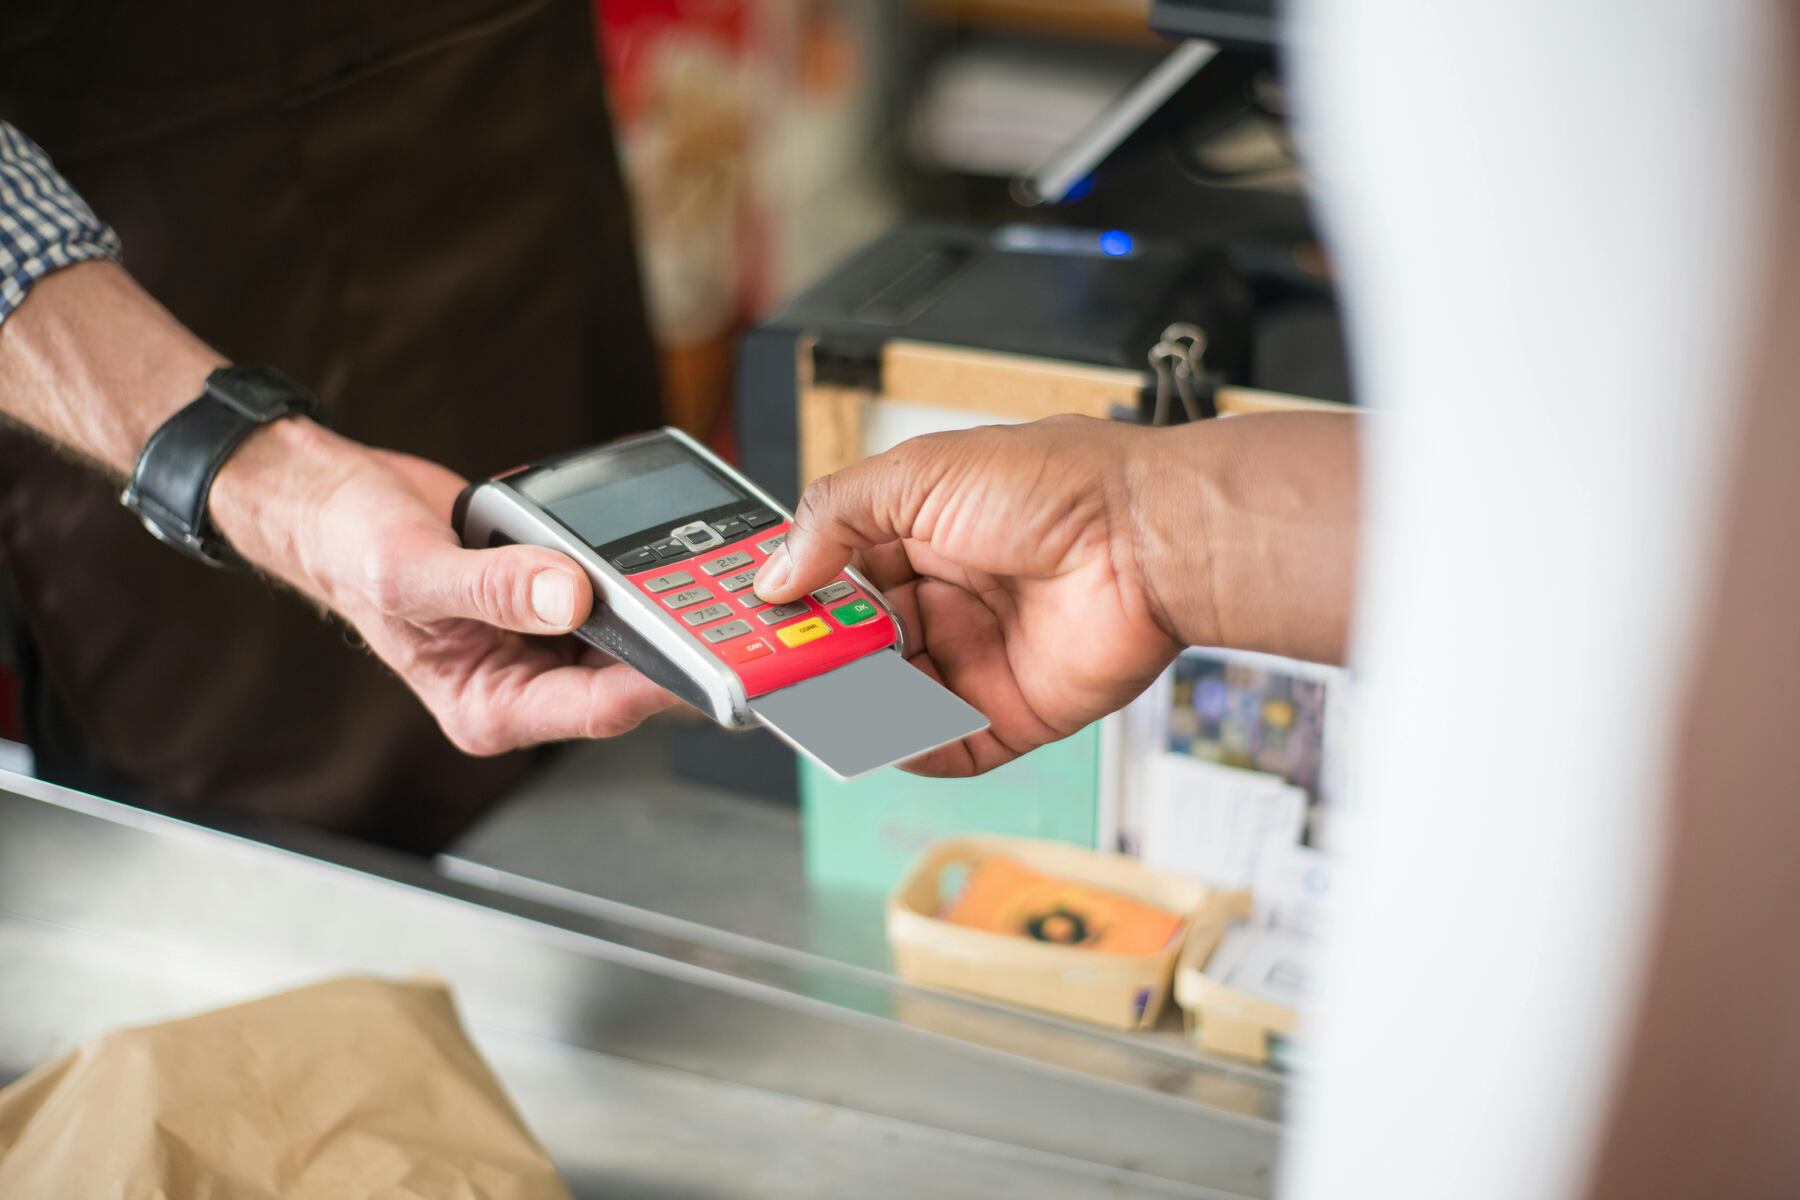 A cashier holding a terminal payment while the customer swipes his card